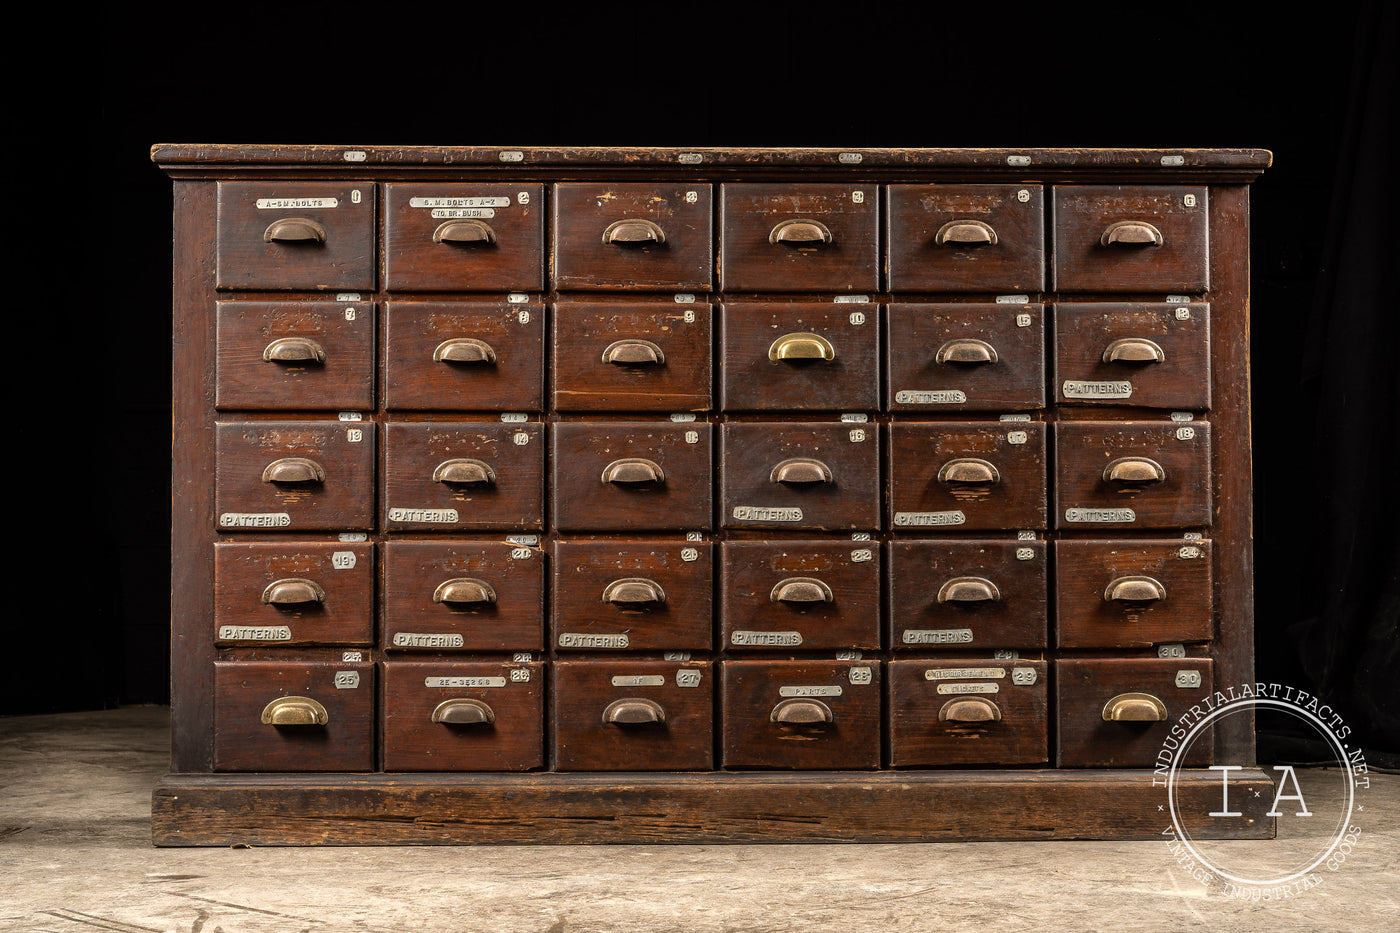 c. 1950 Thirty Drawer Industrial Apothecary Cabinet